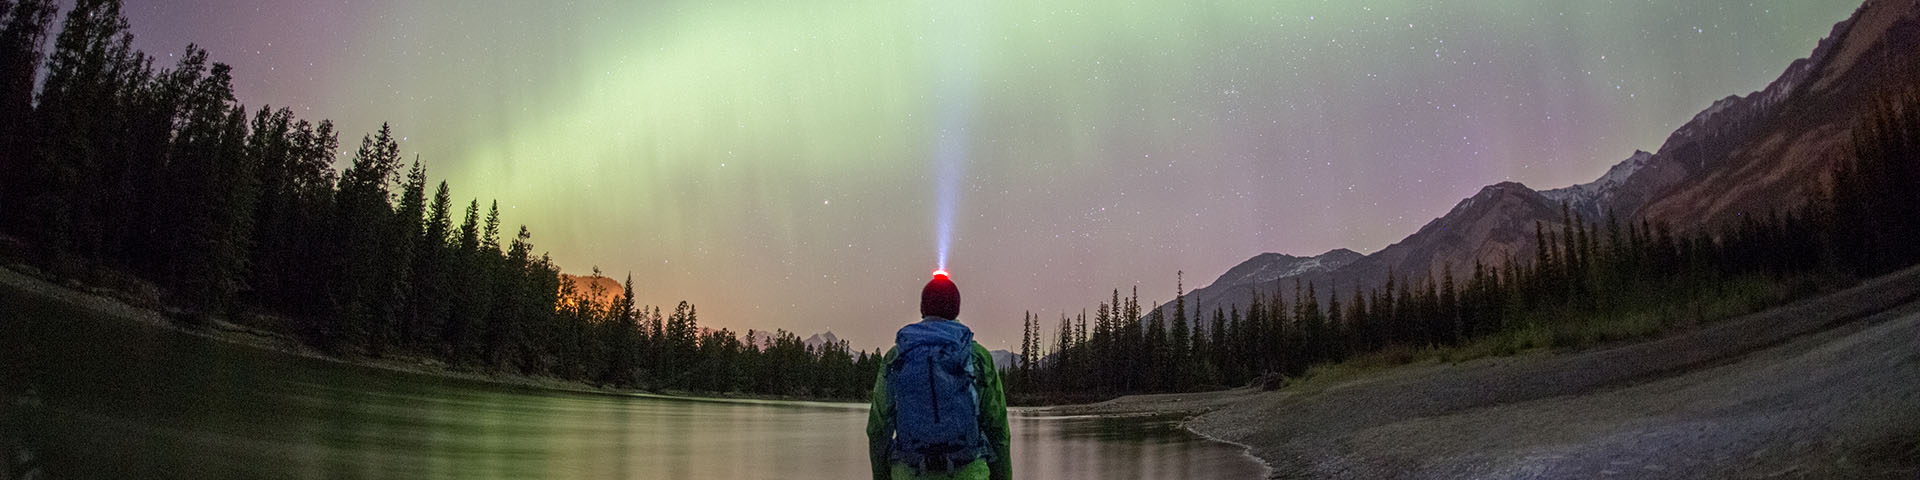 An adult gazes at the Northern Lights on the edge of a lake with mountains and forest in the background at Jasper National Park.